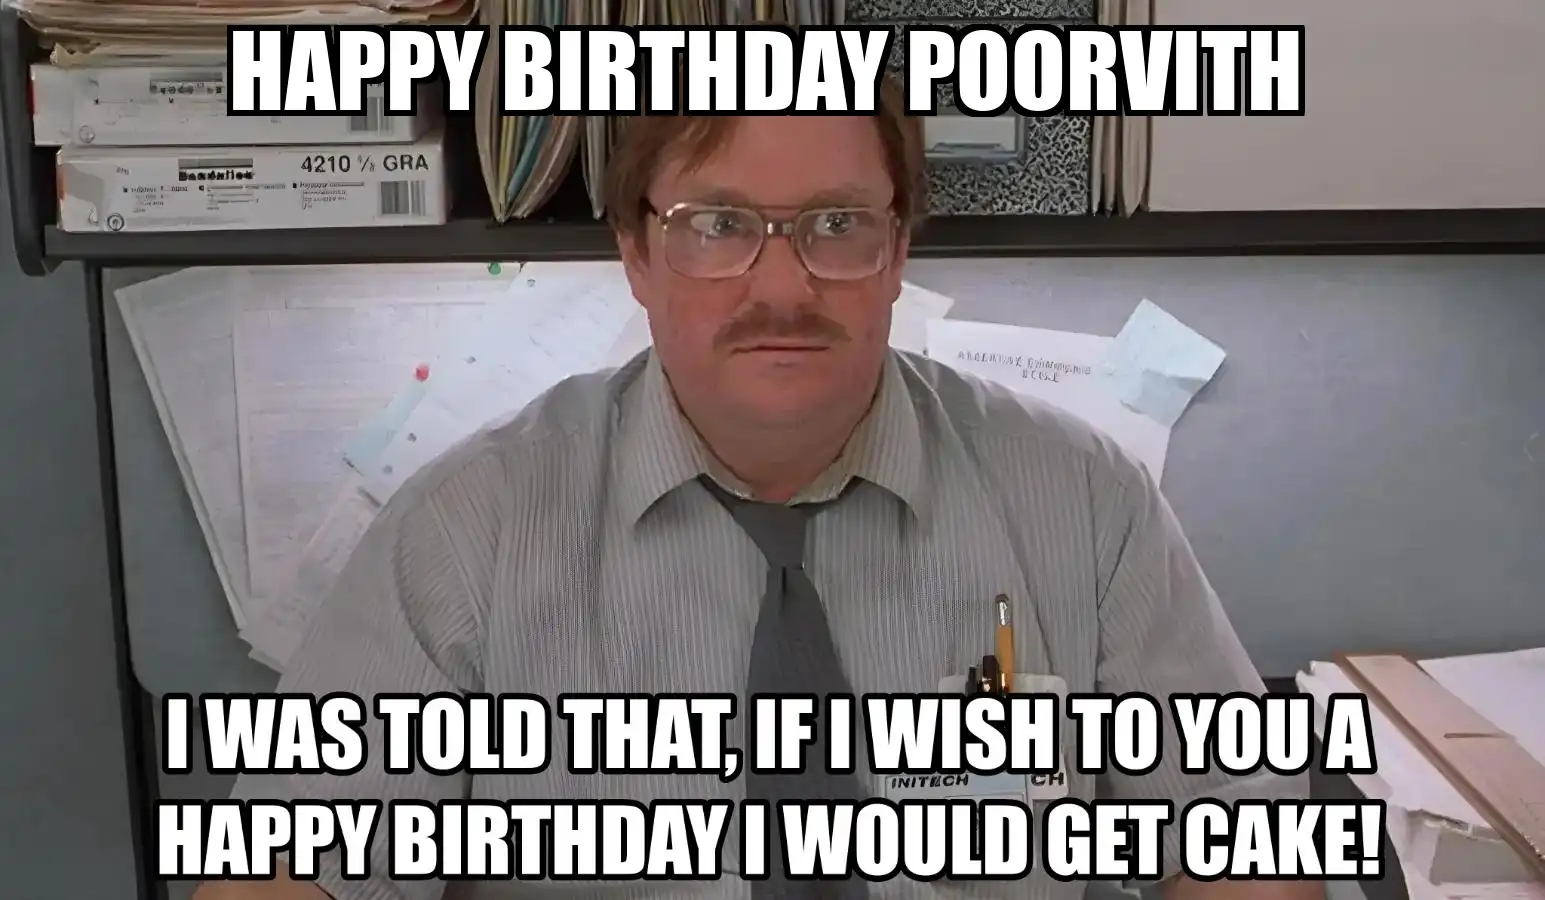 Happy Birthday Poorvith I Would Get A Cake Meme